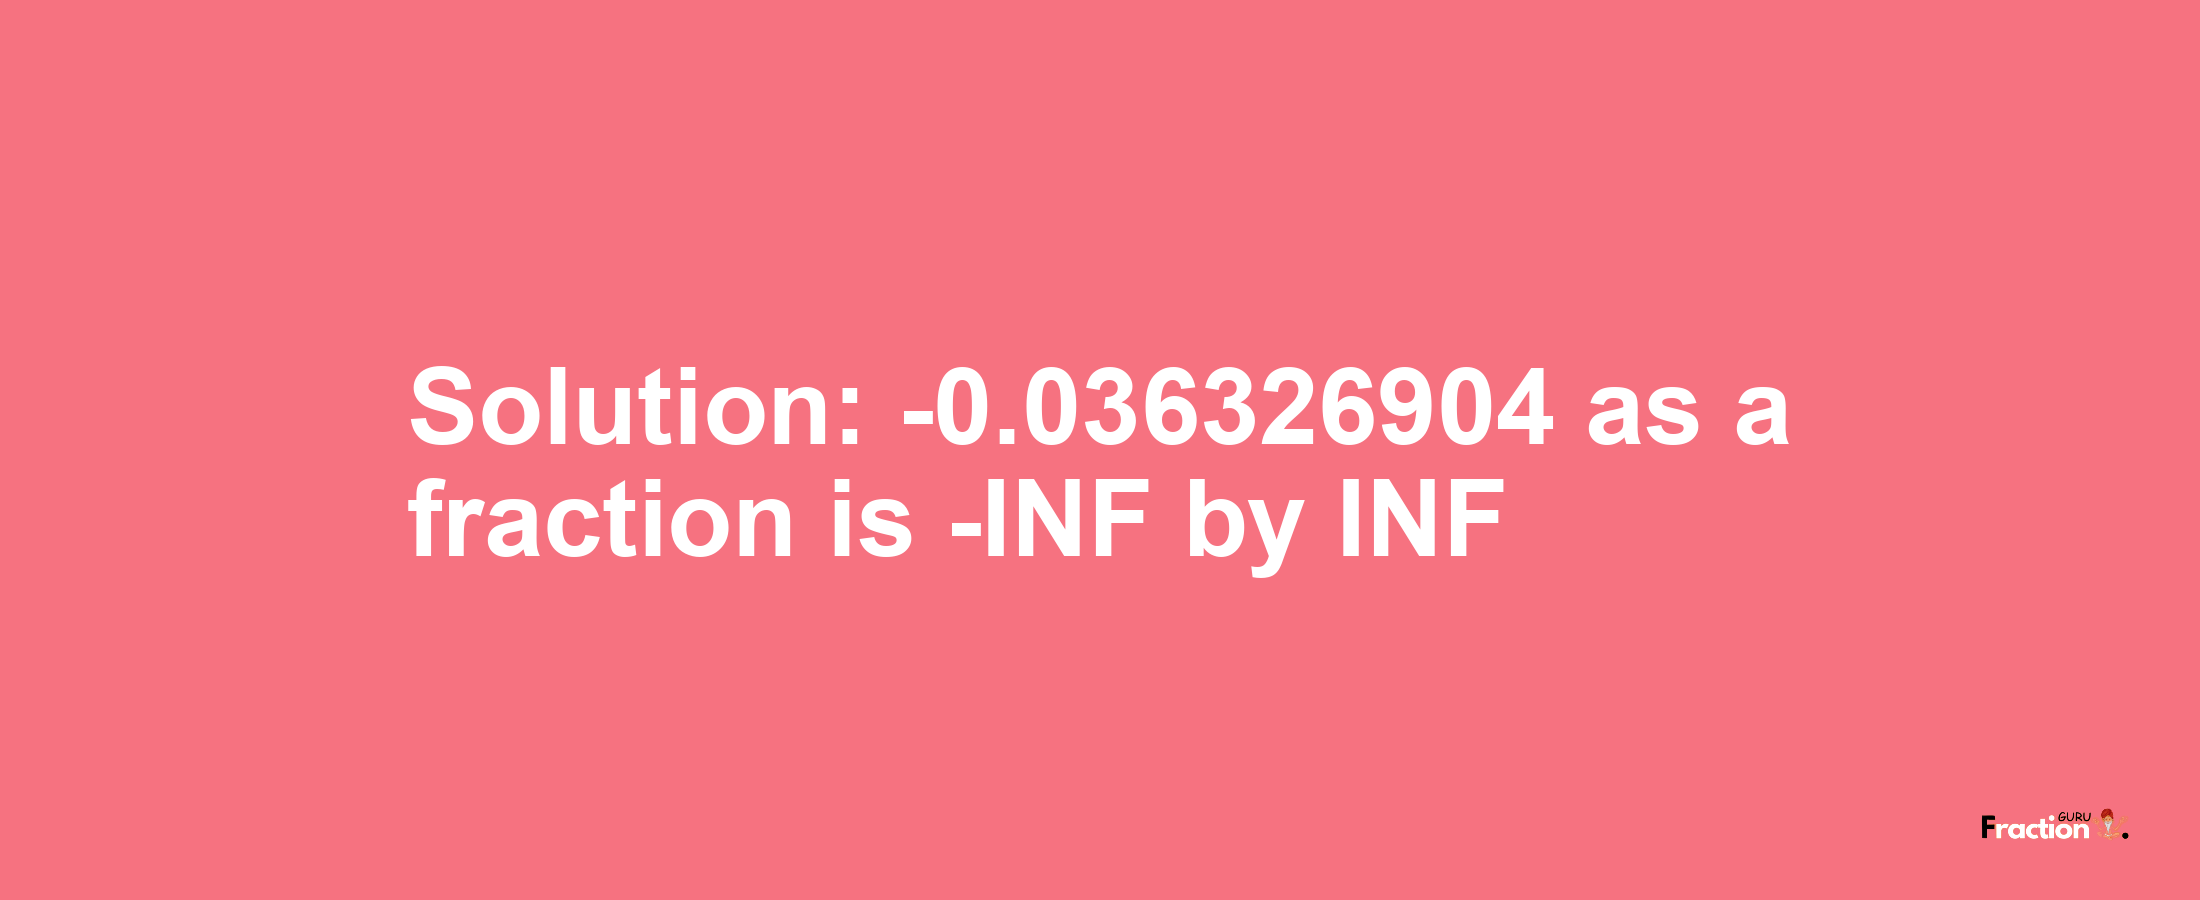 Solution:-0.036326904 as a fraction is -INF/INF